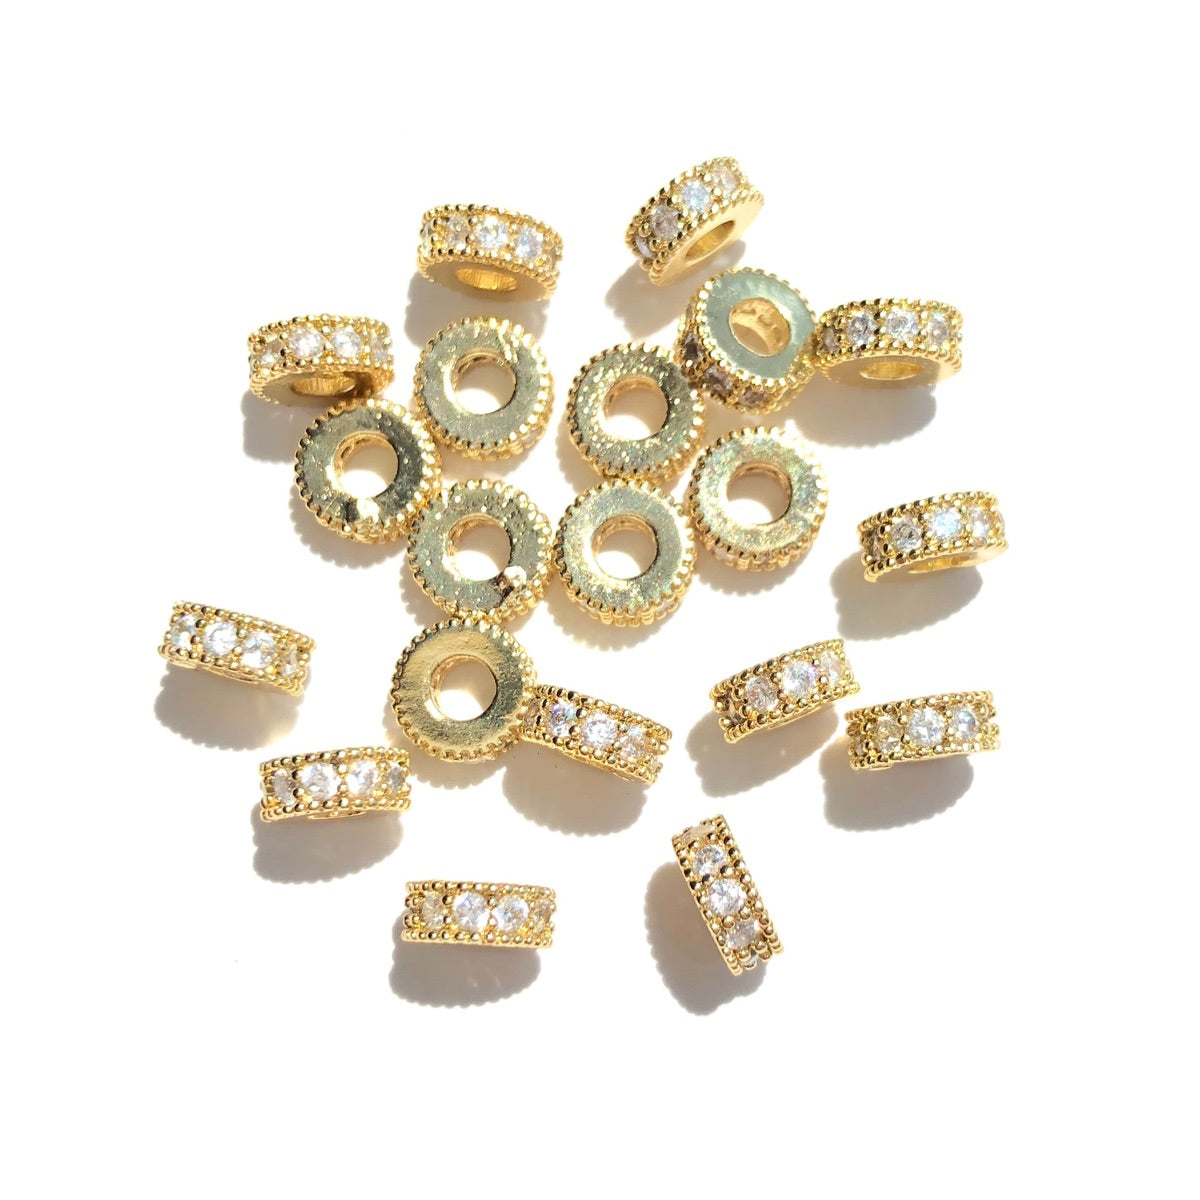 20-50pcs/lot 5.8*2.5mm CZ Paved Small Rondelle Wheel Spacers Gold CZ Paved Spacers New Spacers Arrivals Rondelle Beads Wholesale Charms Beads Beyond